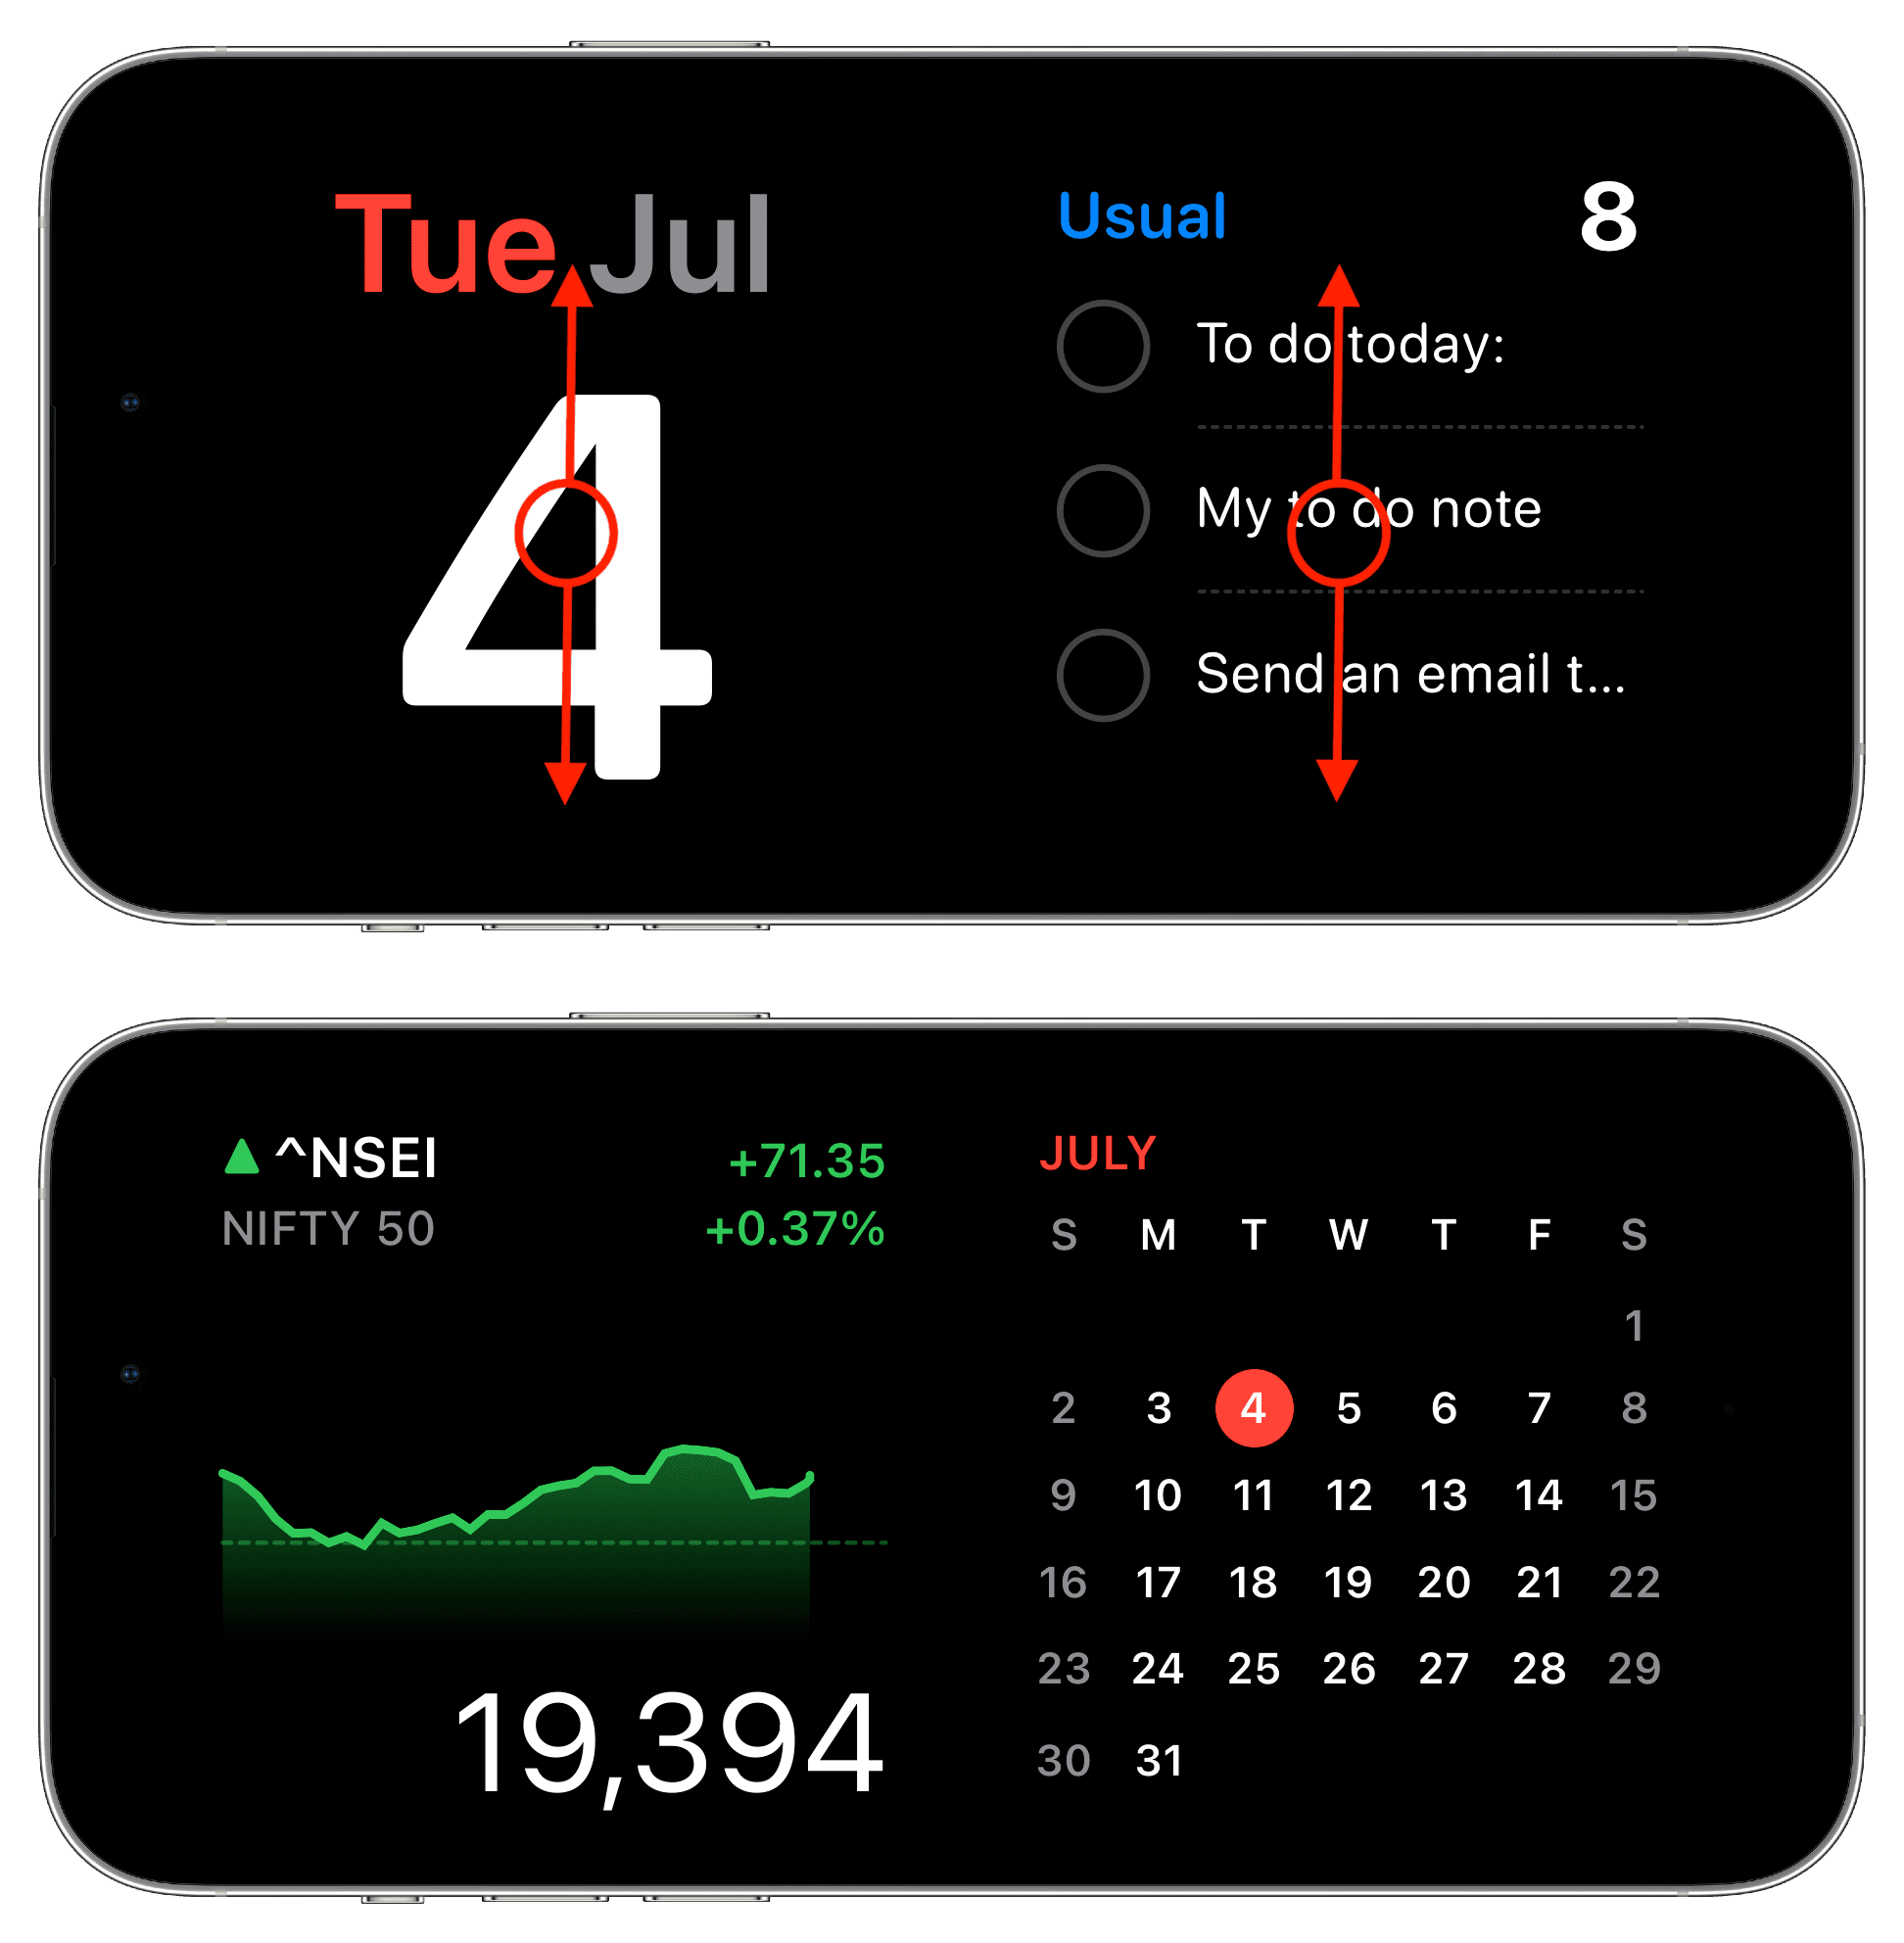 Switch to another widget on StandBy screen on iPhone